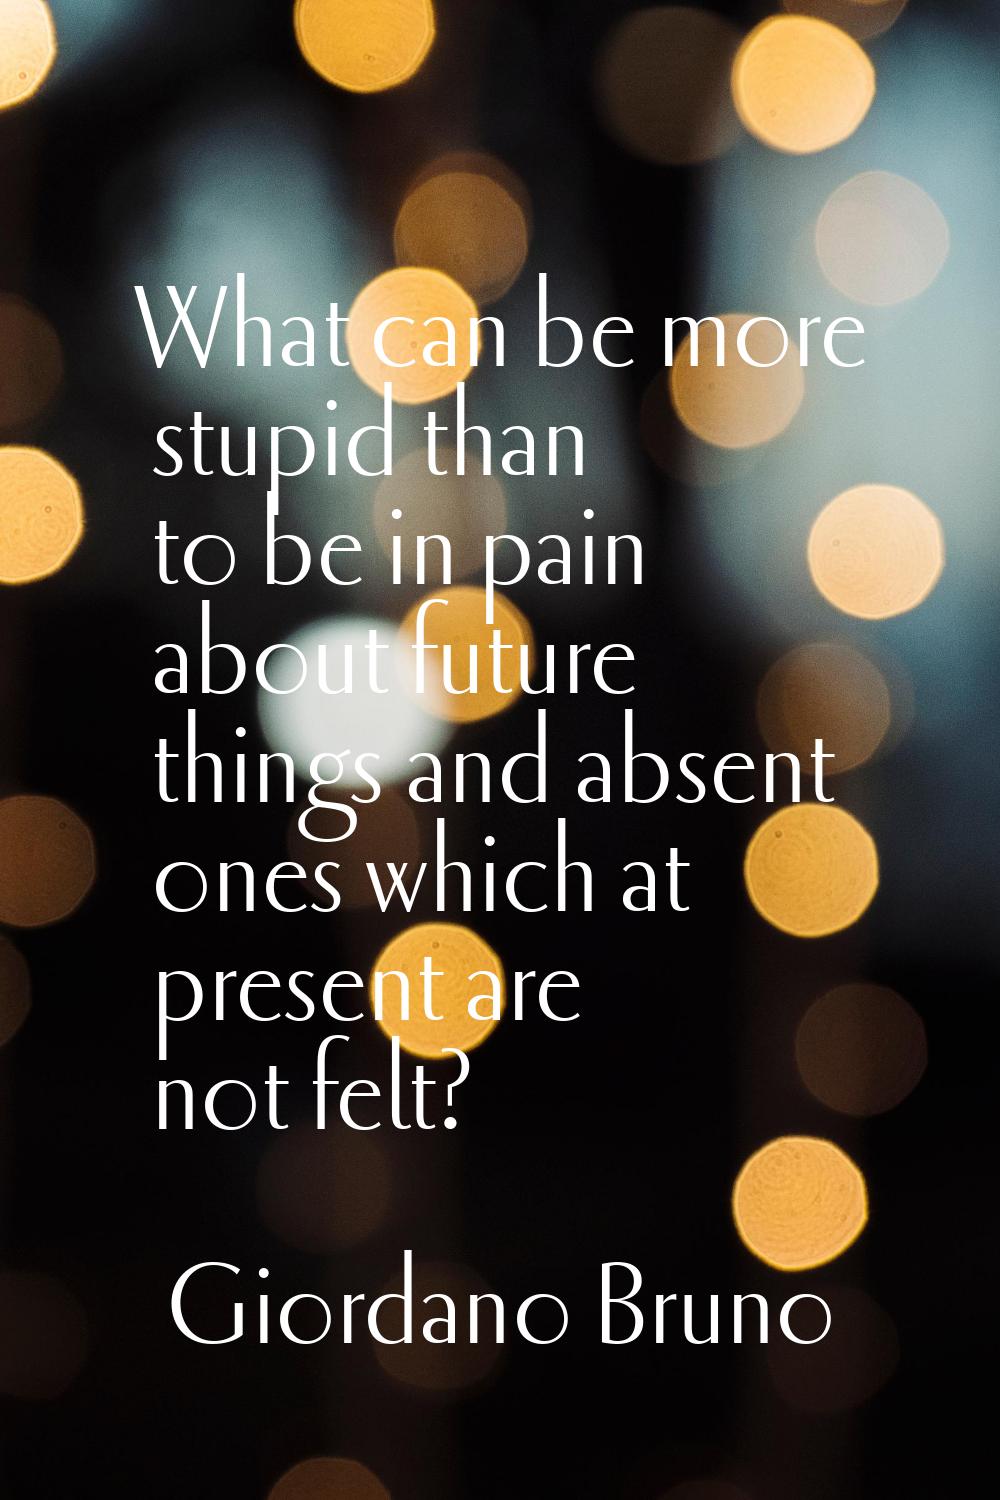 What can be more stupid than to be in pain about future things and absent ones which at present are